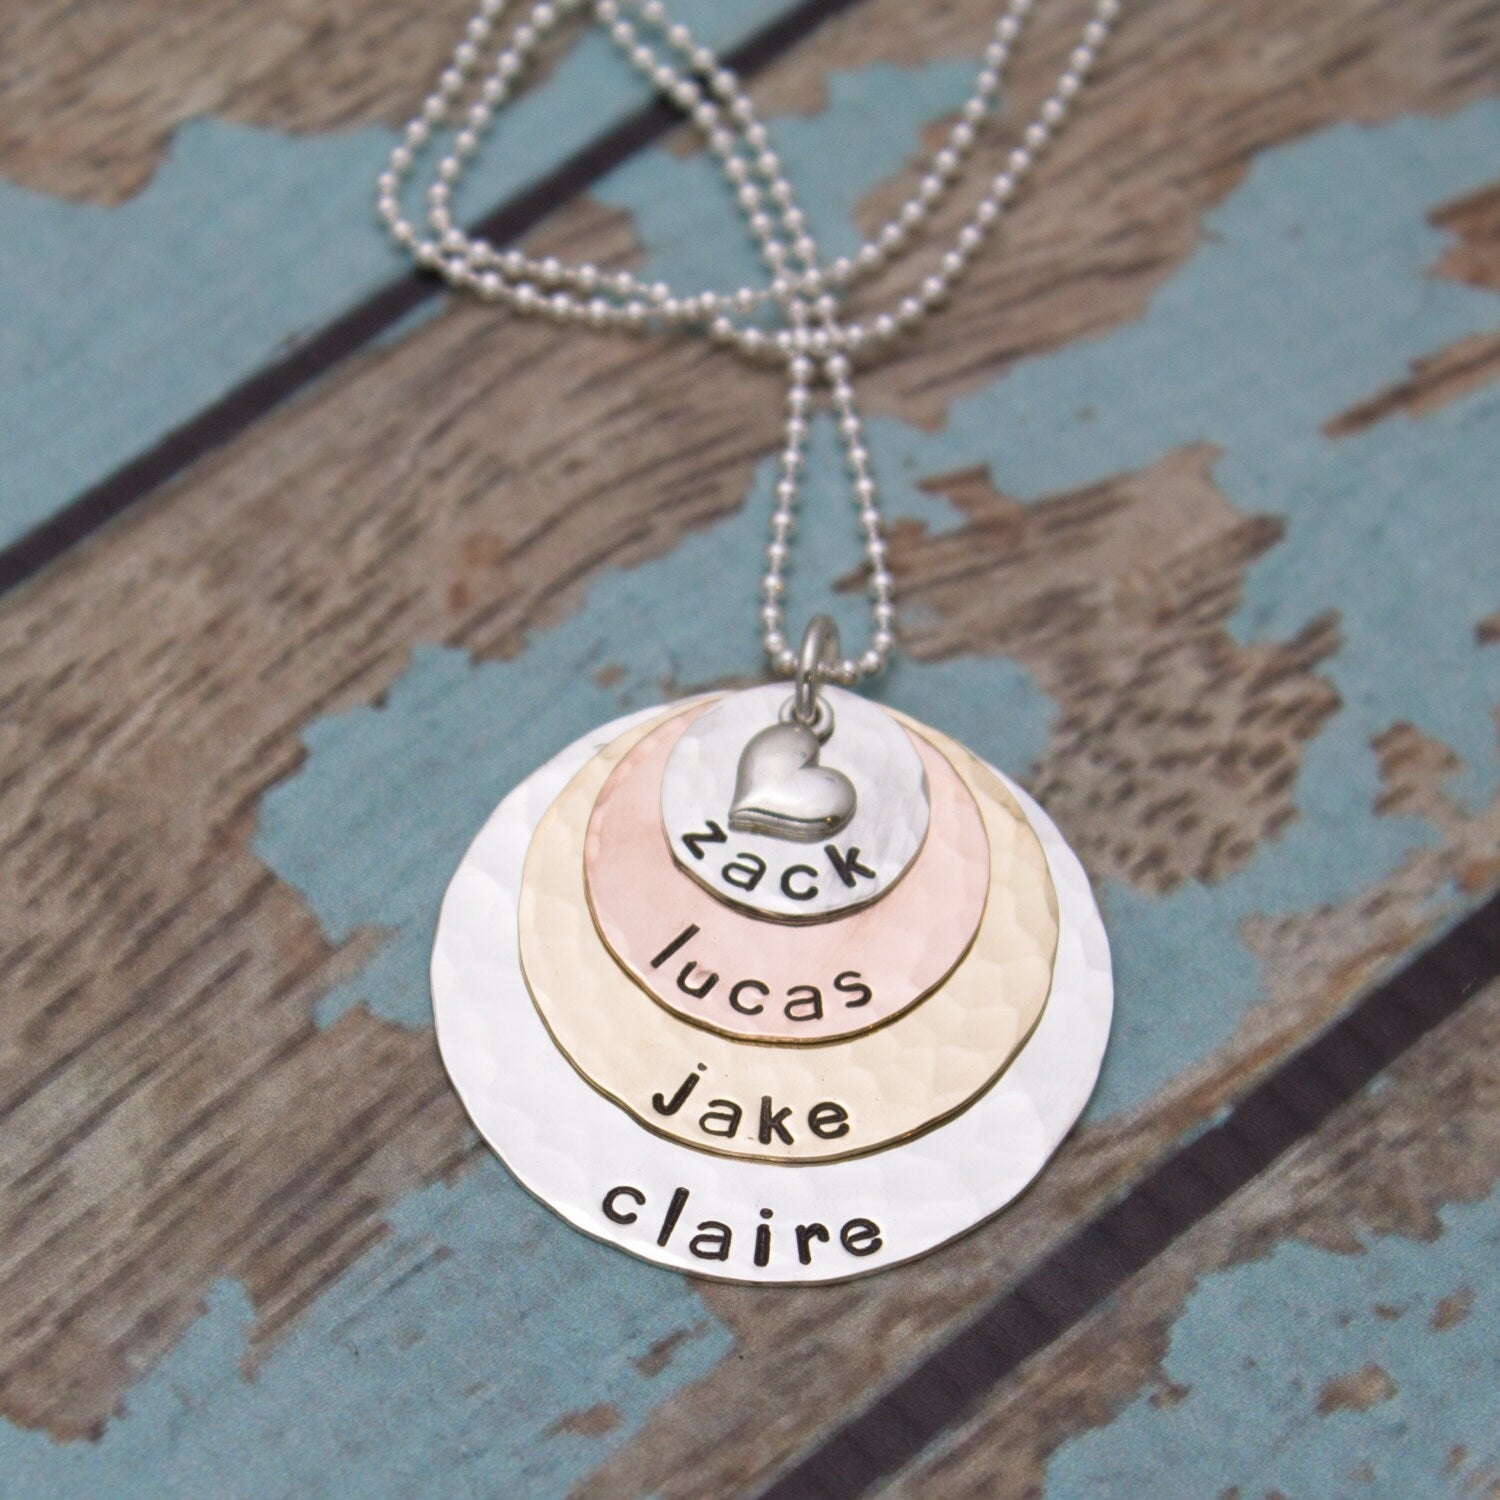 Mother or Grandmother Necklace in Four (4) Layers Silver, Copper and Brass Necklace Personalized Hand Stamped Jewelry